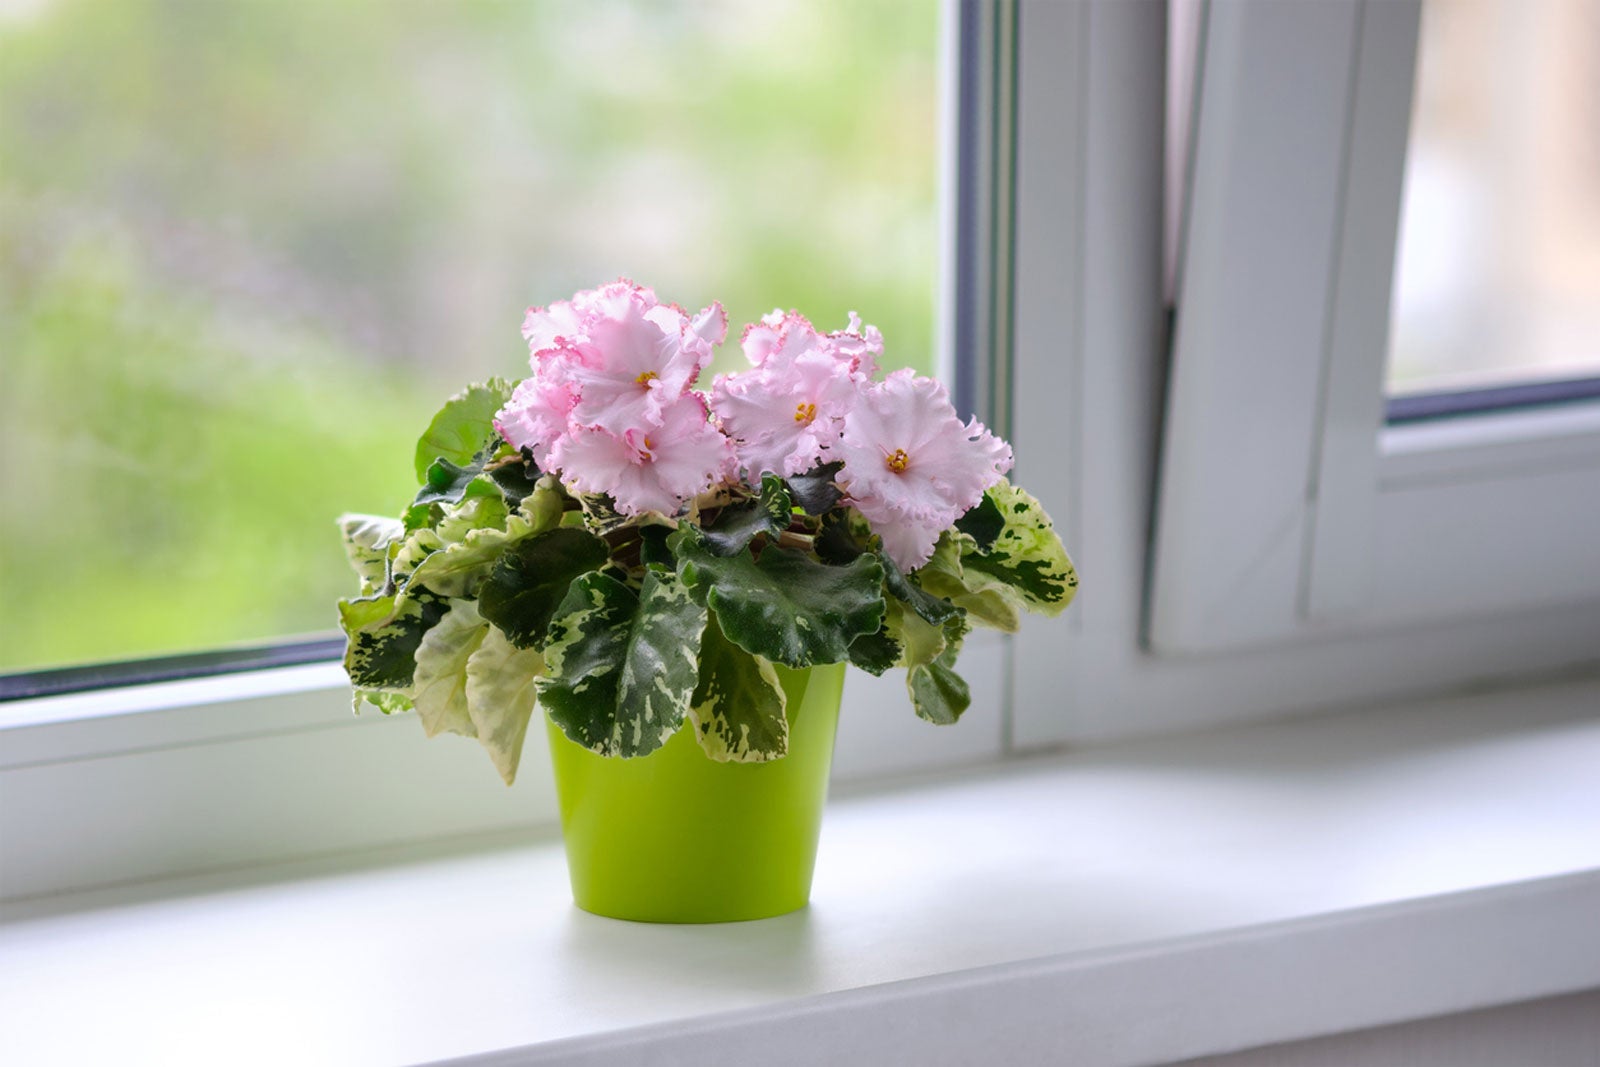 Best plants to grow indoors by window